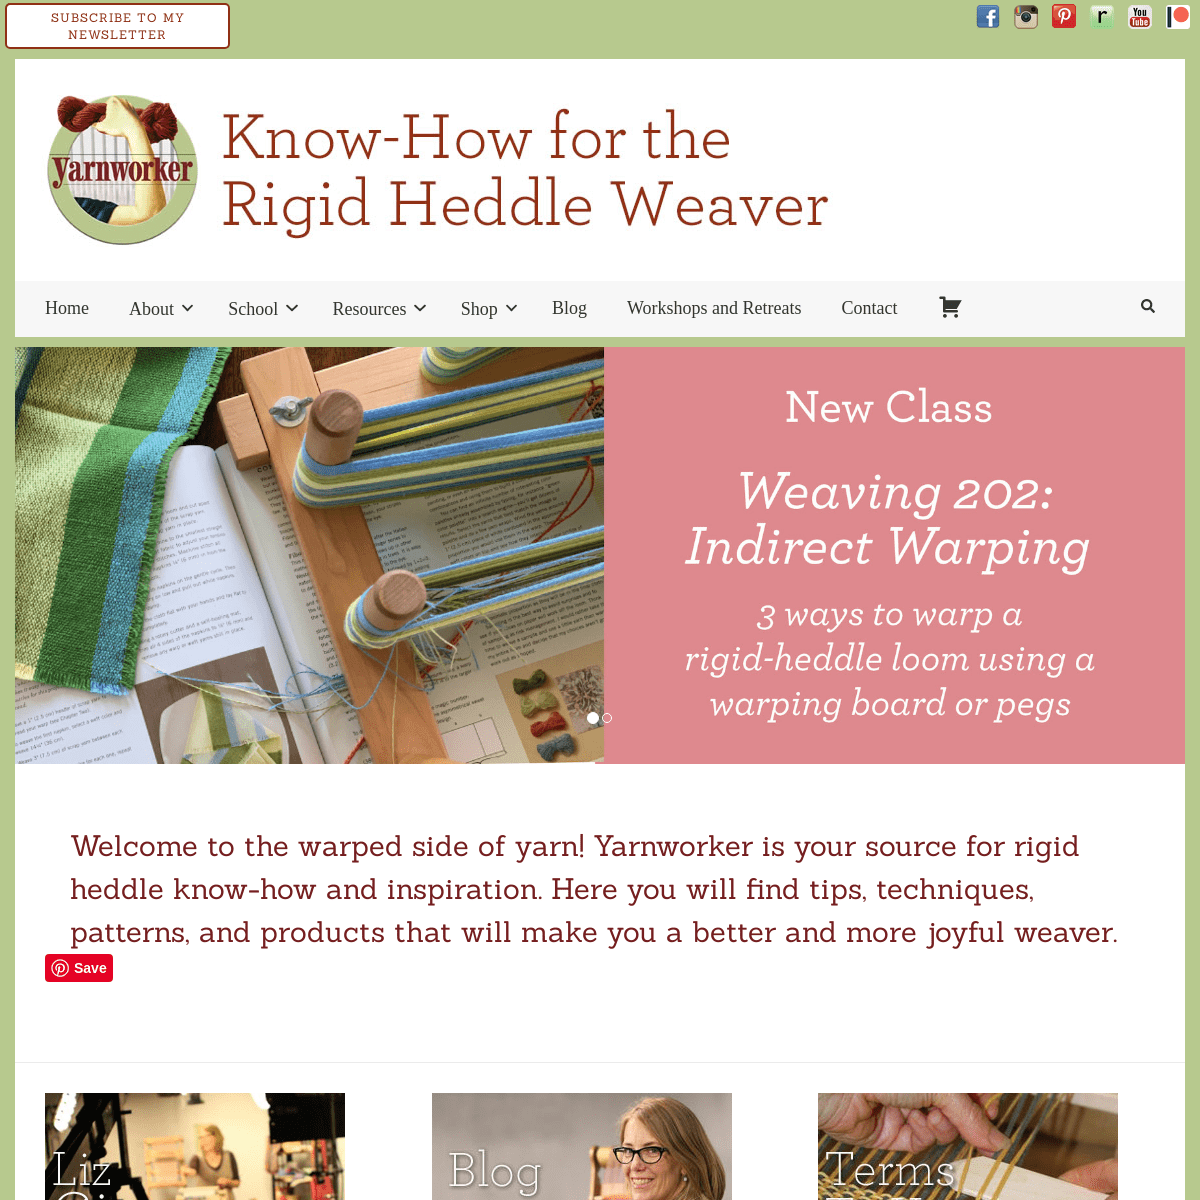 Home - Yarnworker - Know-how for the rigid heddle loom